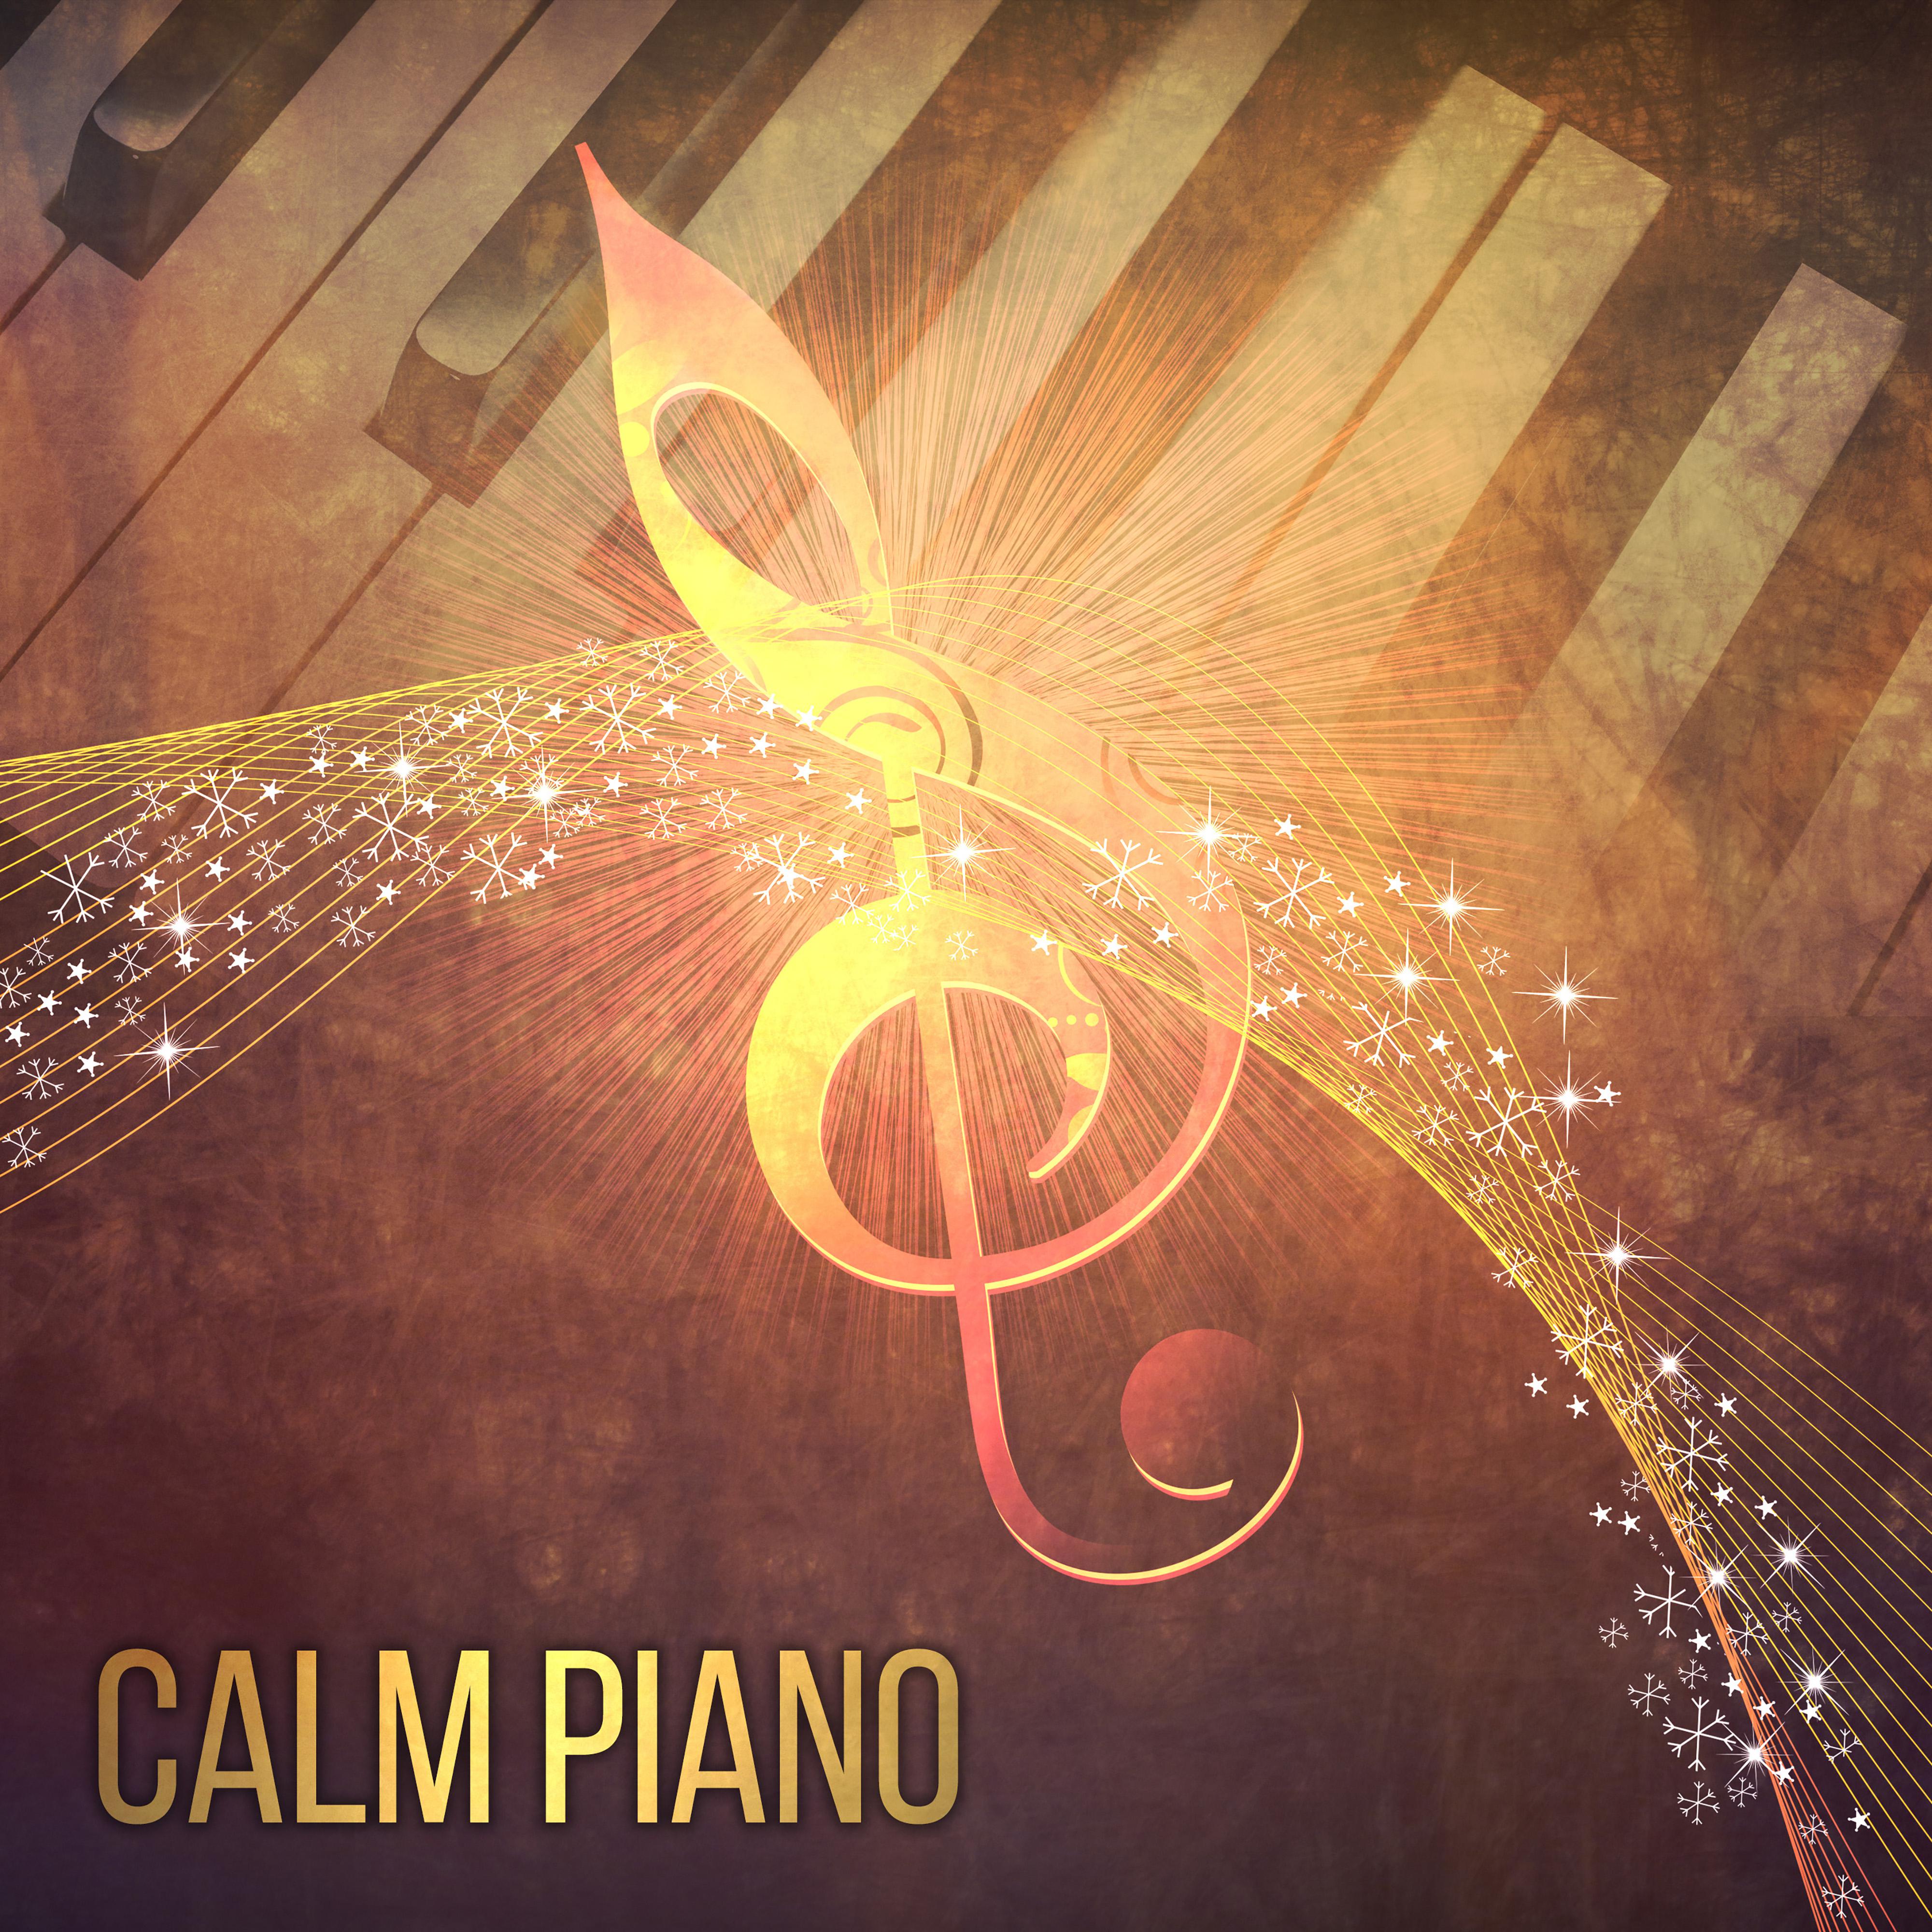 Calm Piano – Mellow Jazz Instrumental, Music for Dinner, Relax Time, Peaceful Piano